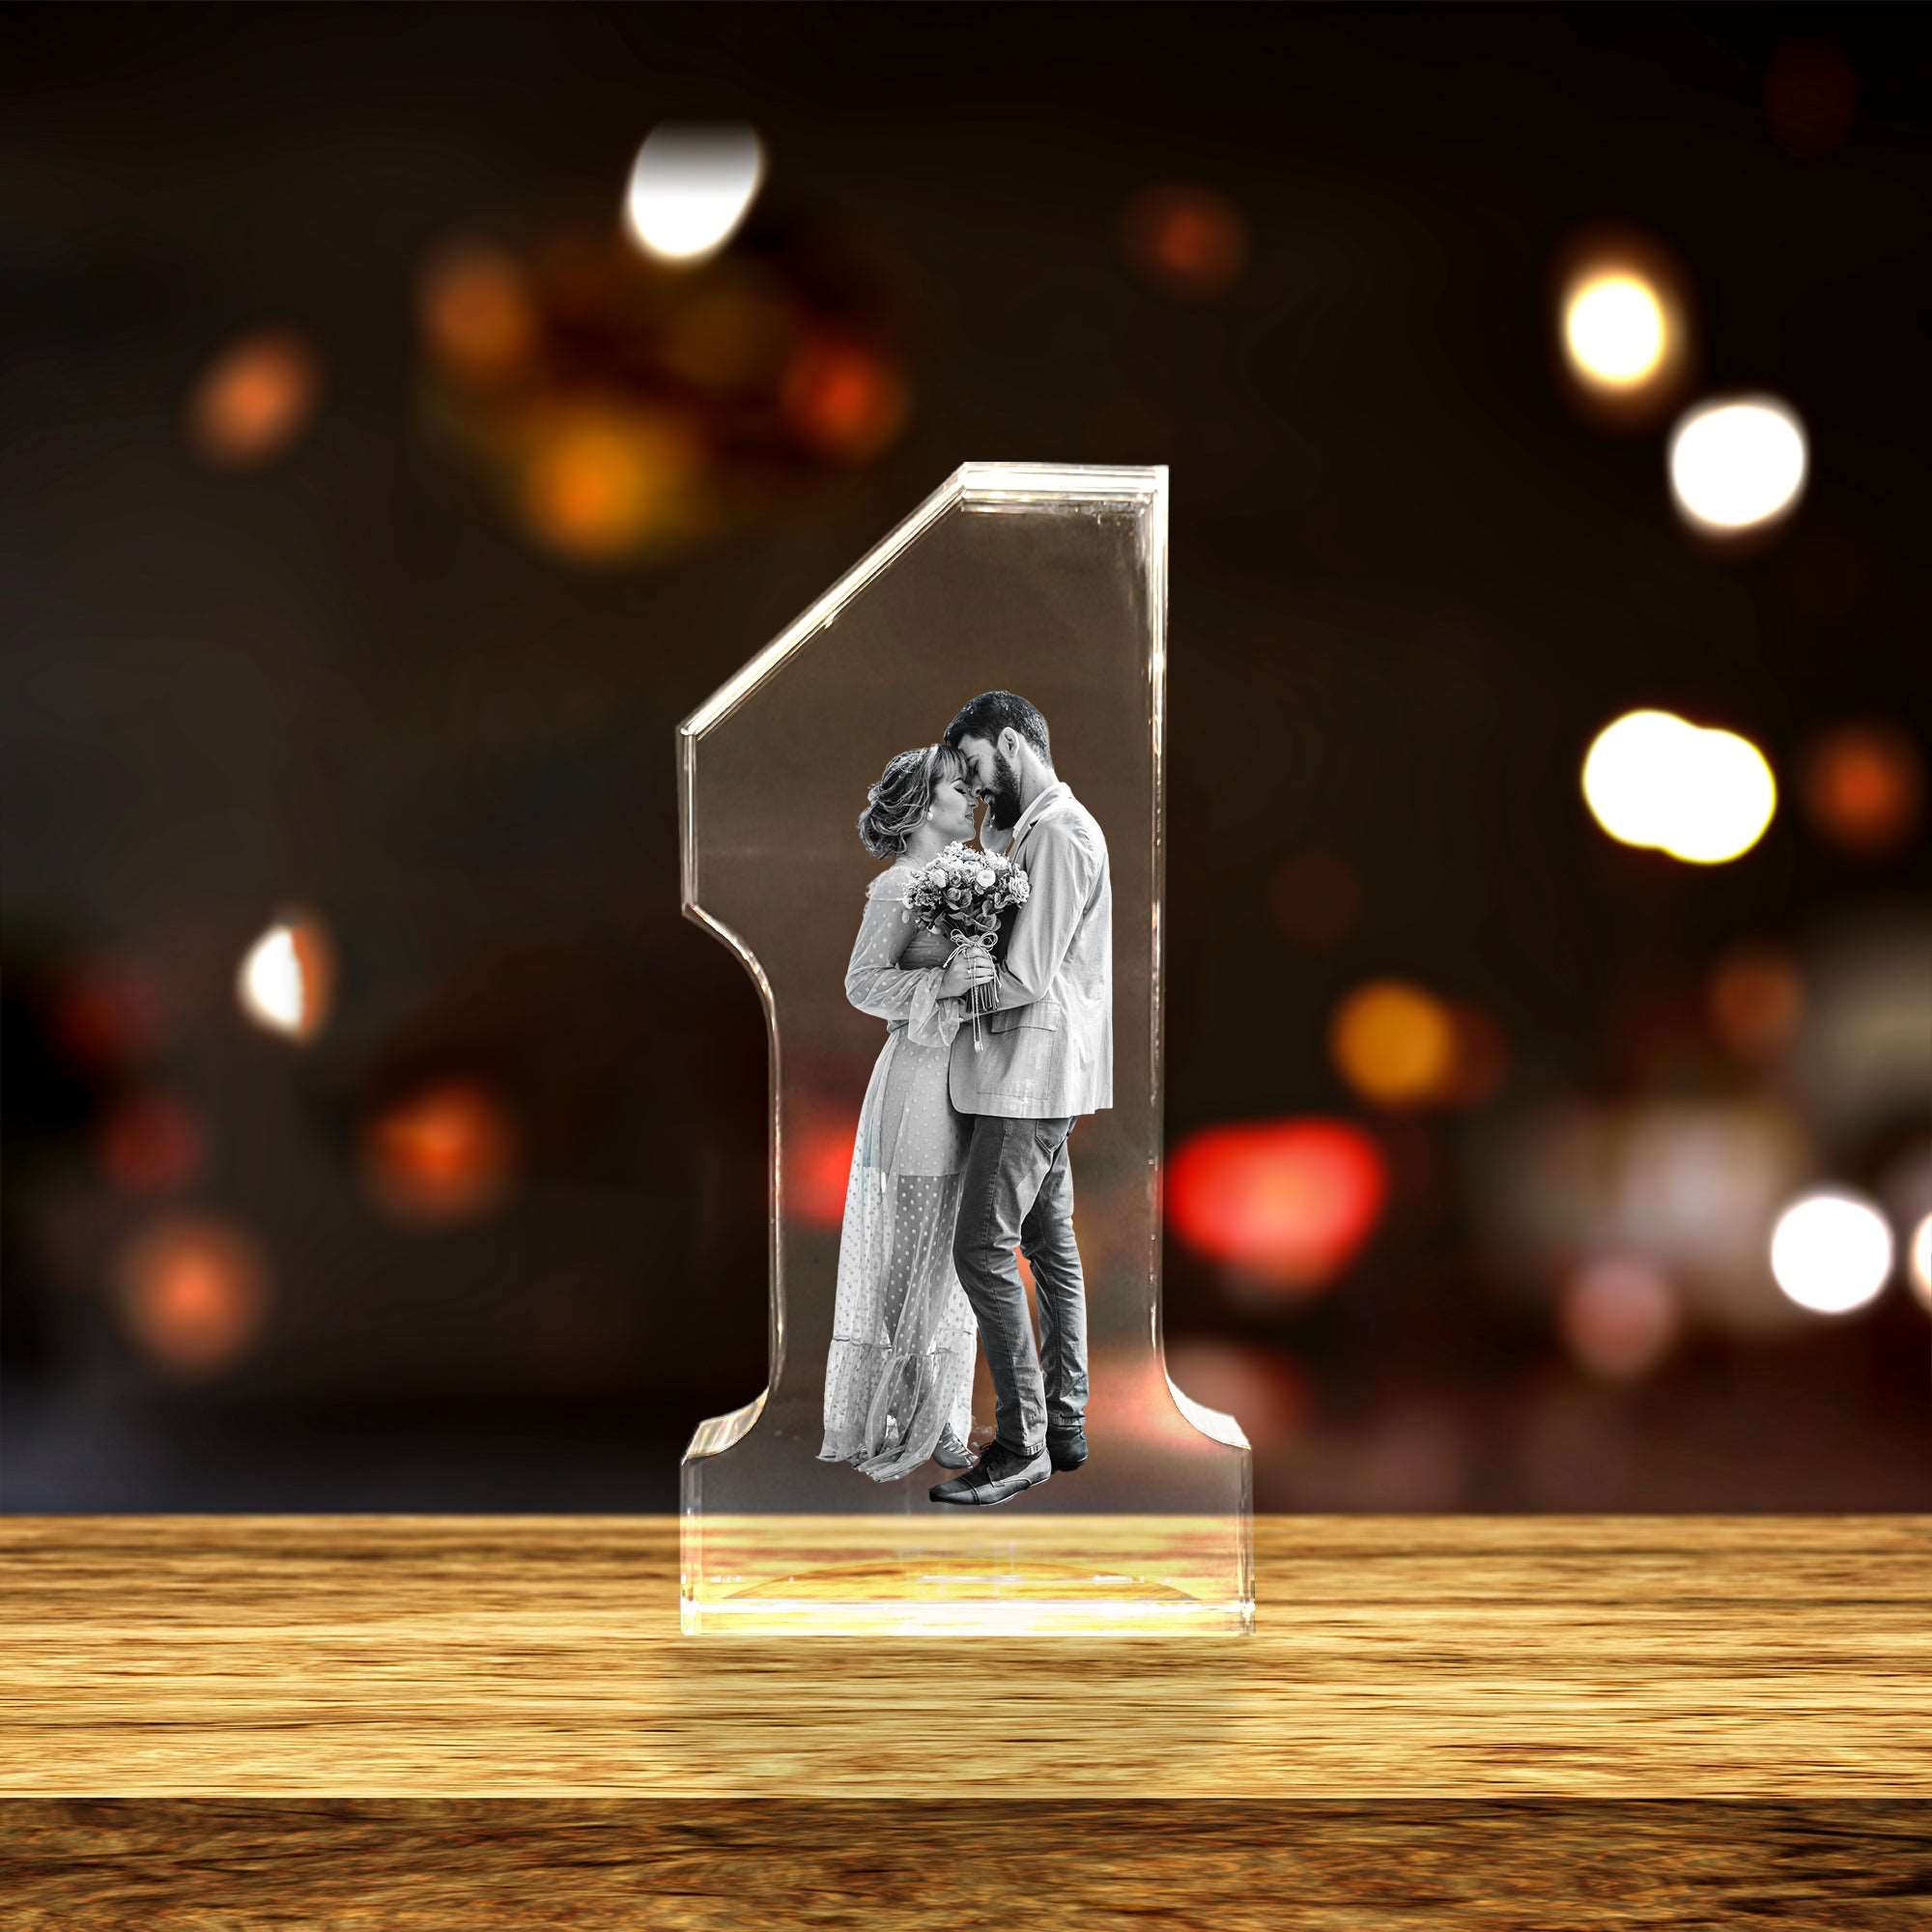 Best Employee of the Month 3D Engraved Crystal Gift - Number 1 Award AB Crystal Collection